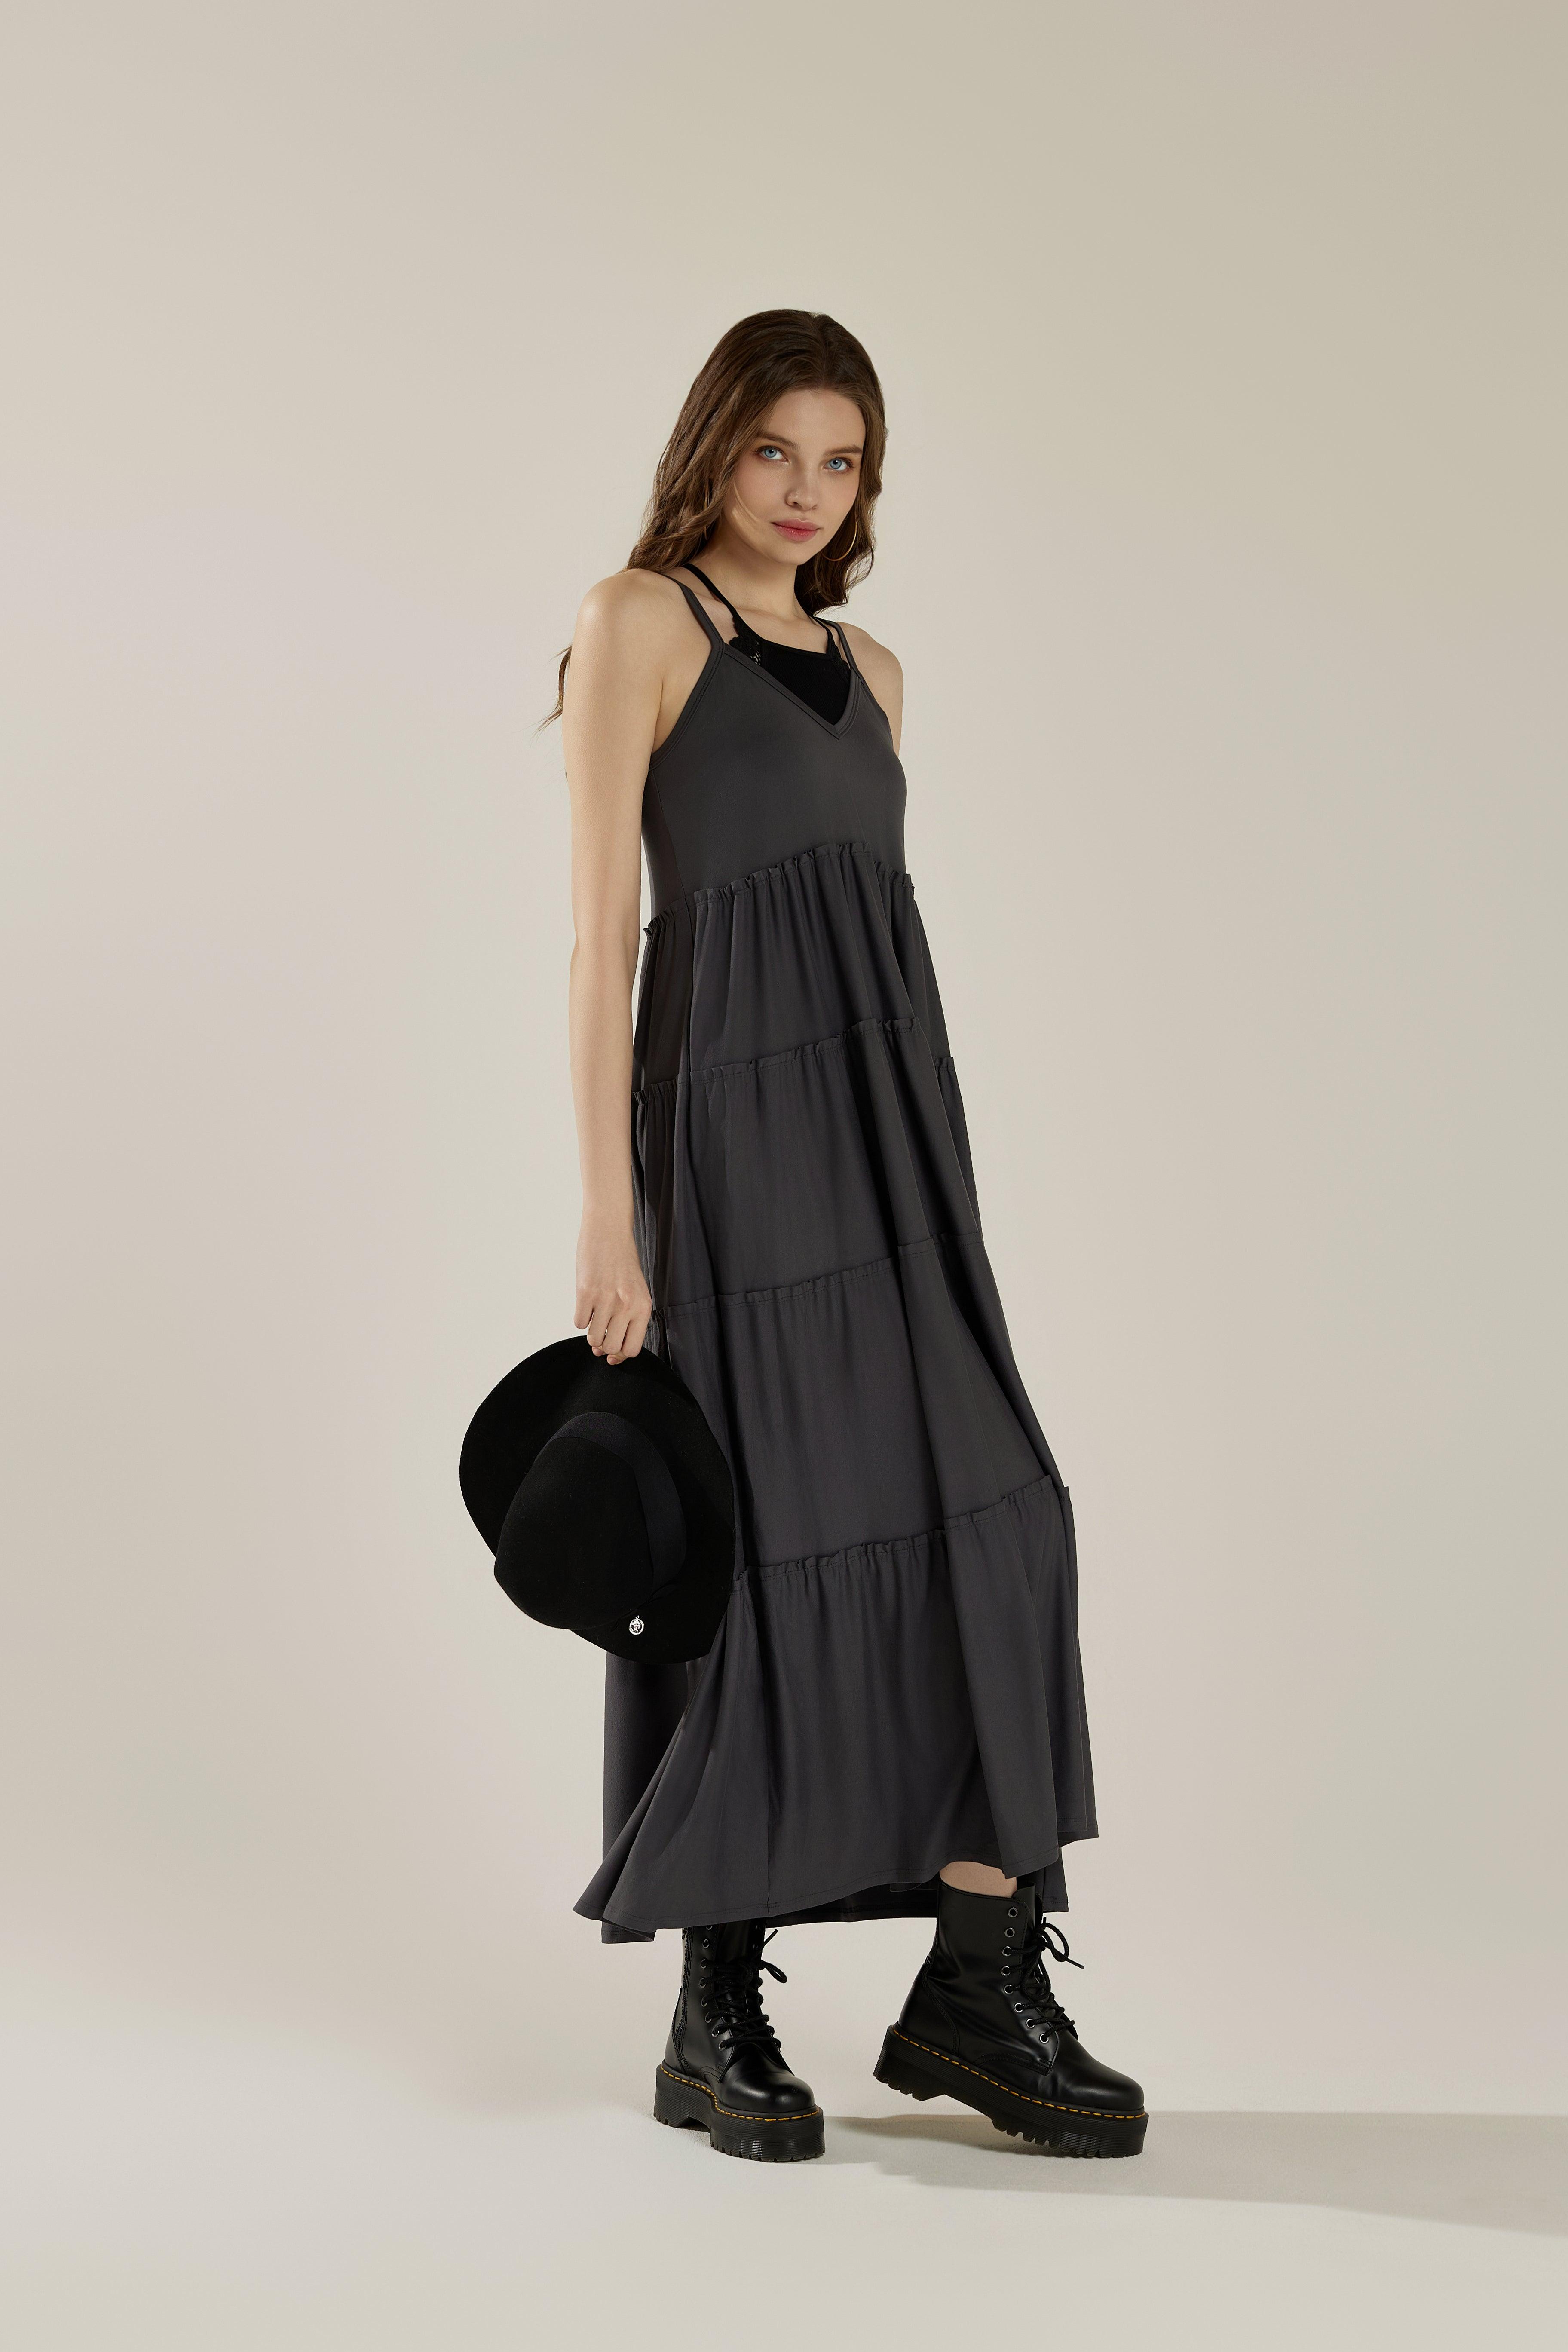 Comfortable and Flowy Knit V-neckline Ruffle Tiers Knit Maxi Dress - Charcoal - noflik